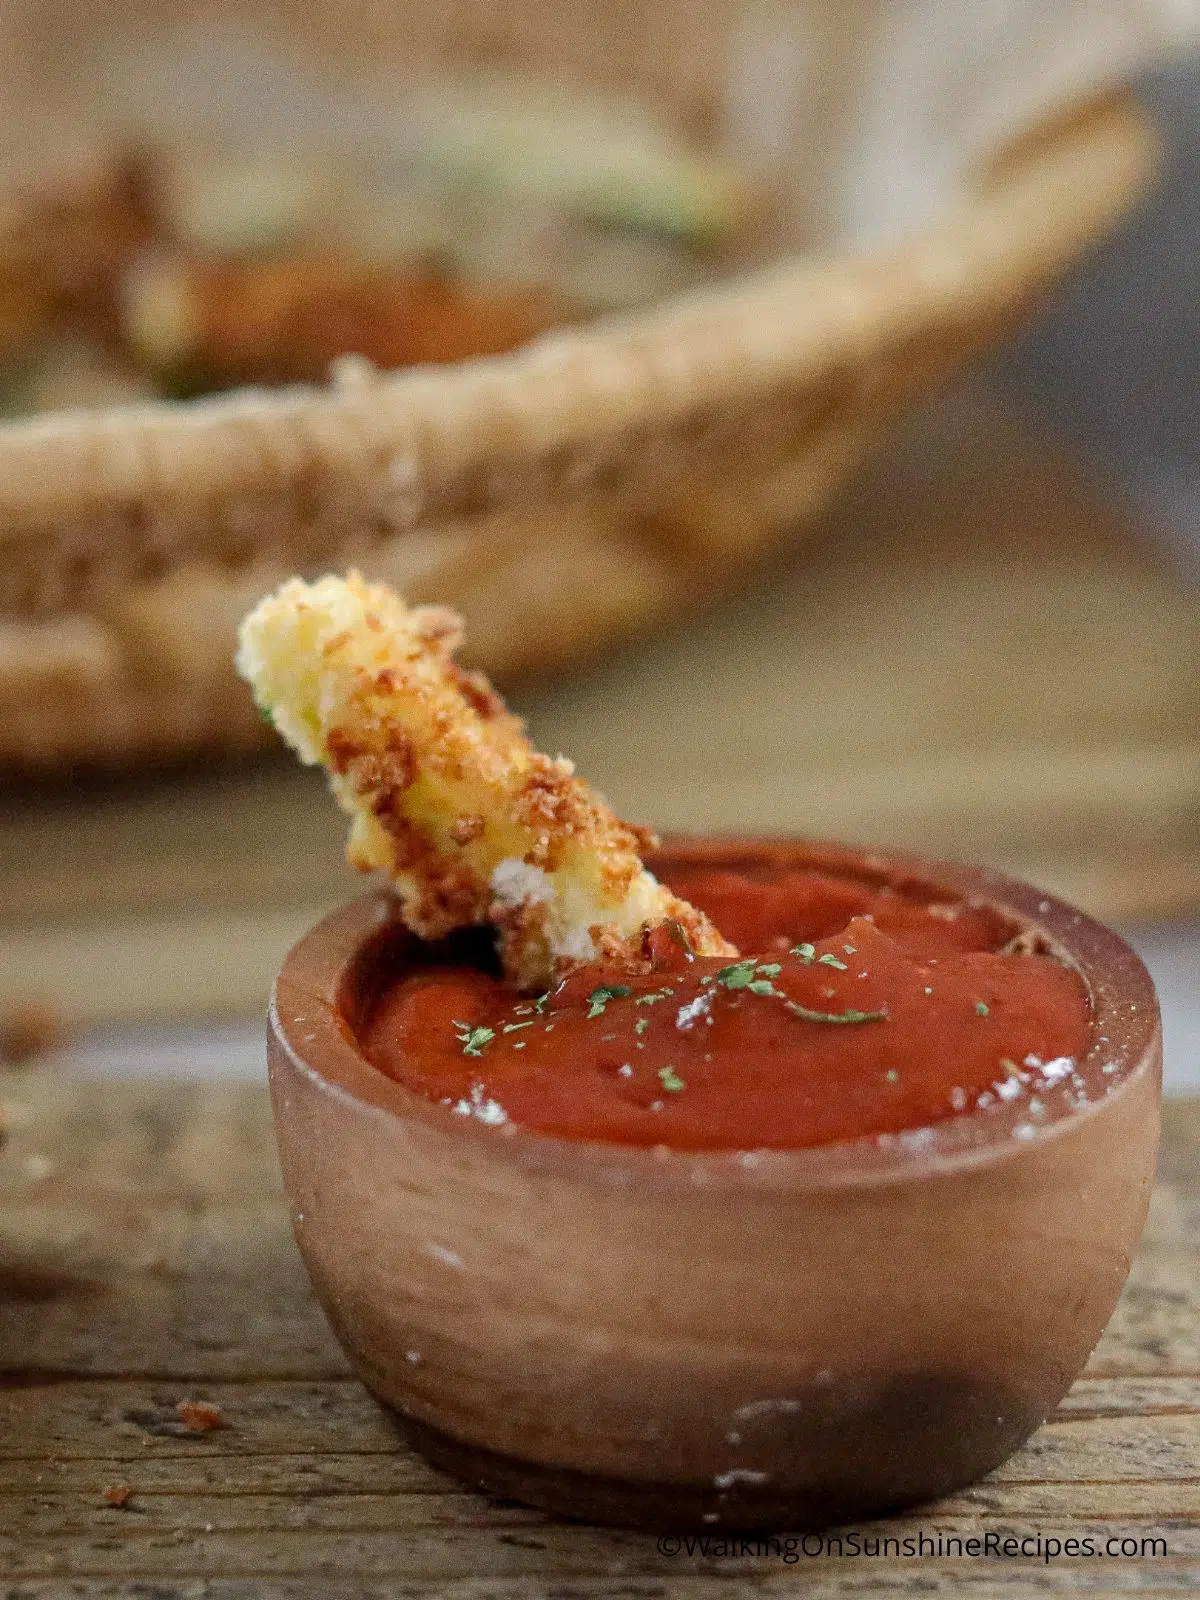 zucchini fry dipped in ketchup